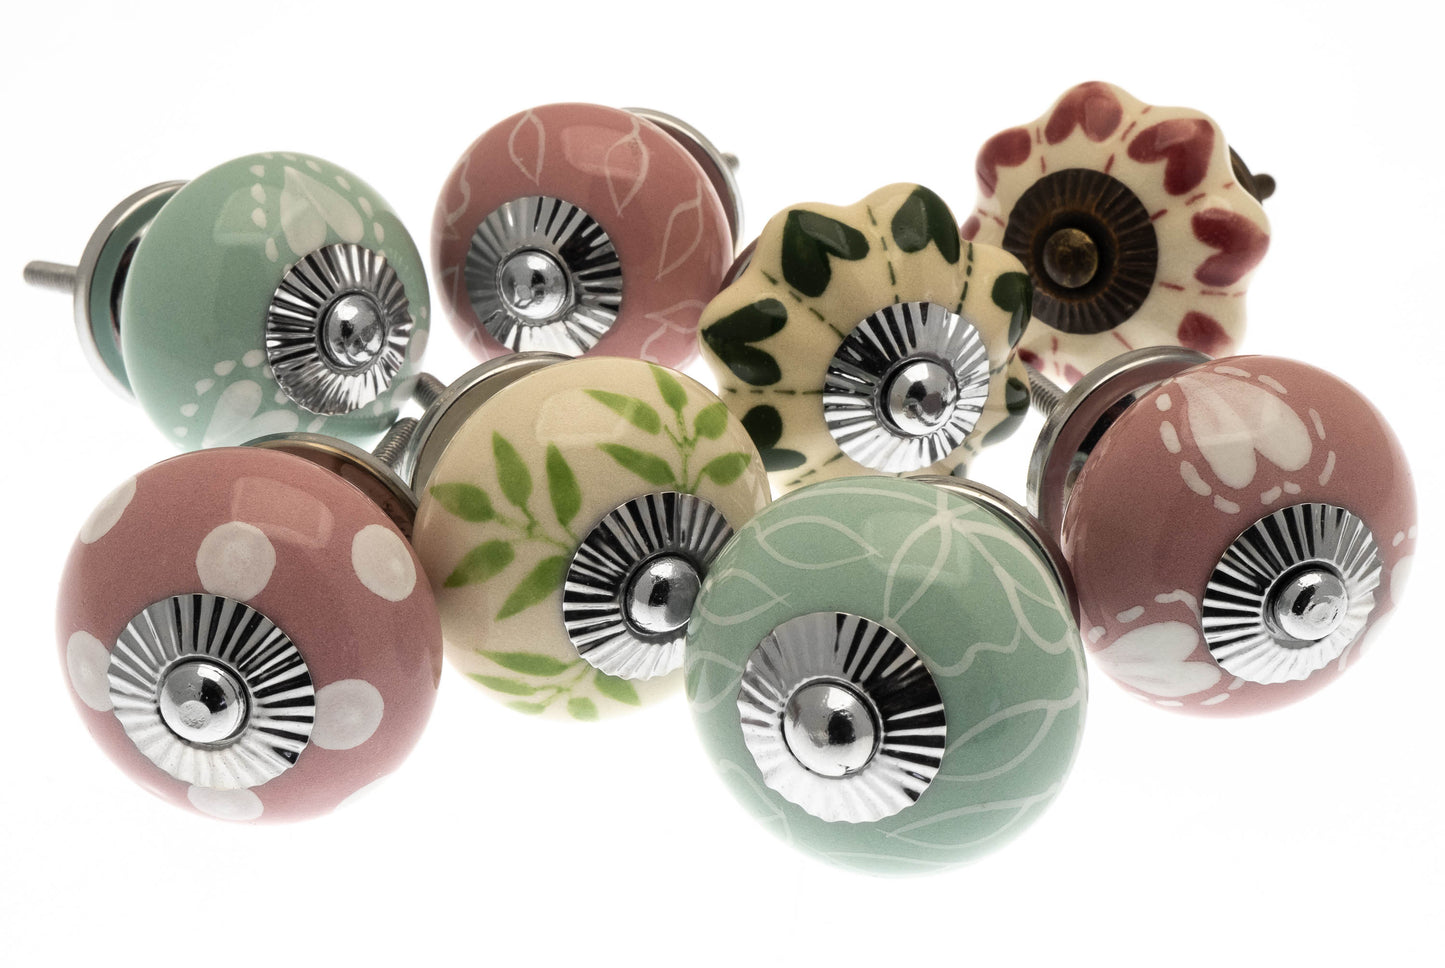 Ceramic Door Knobs Hand Painted in Pastel Pinks and Greens (Set of 8)